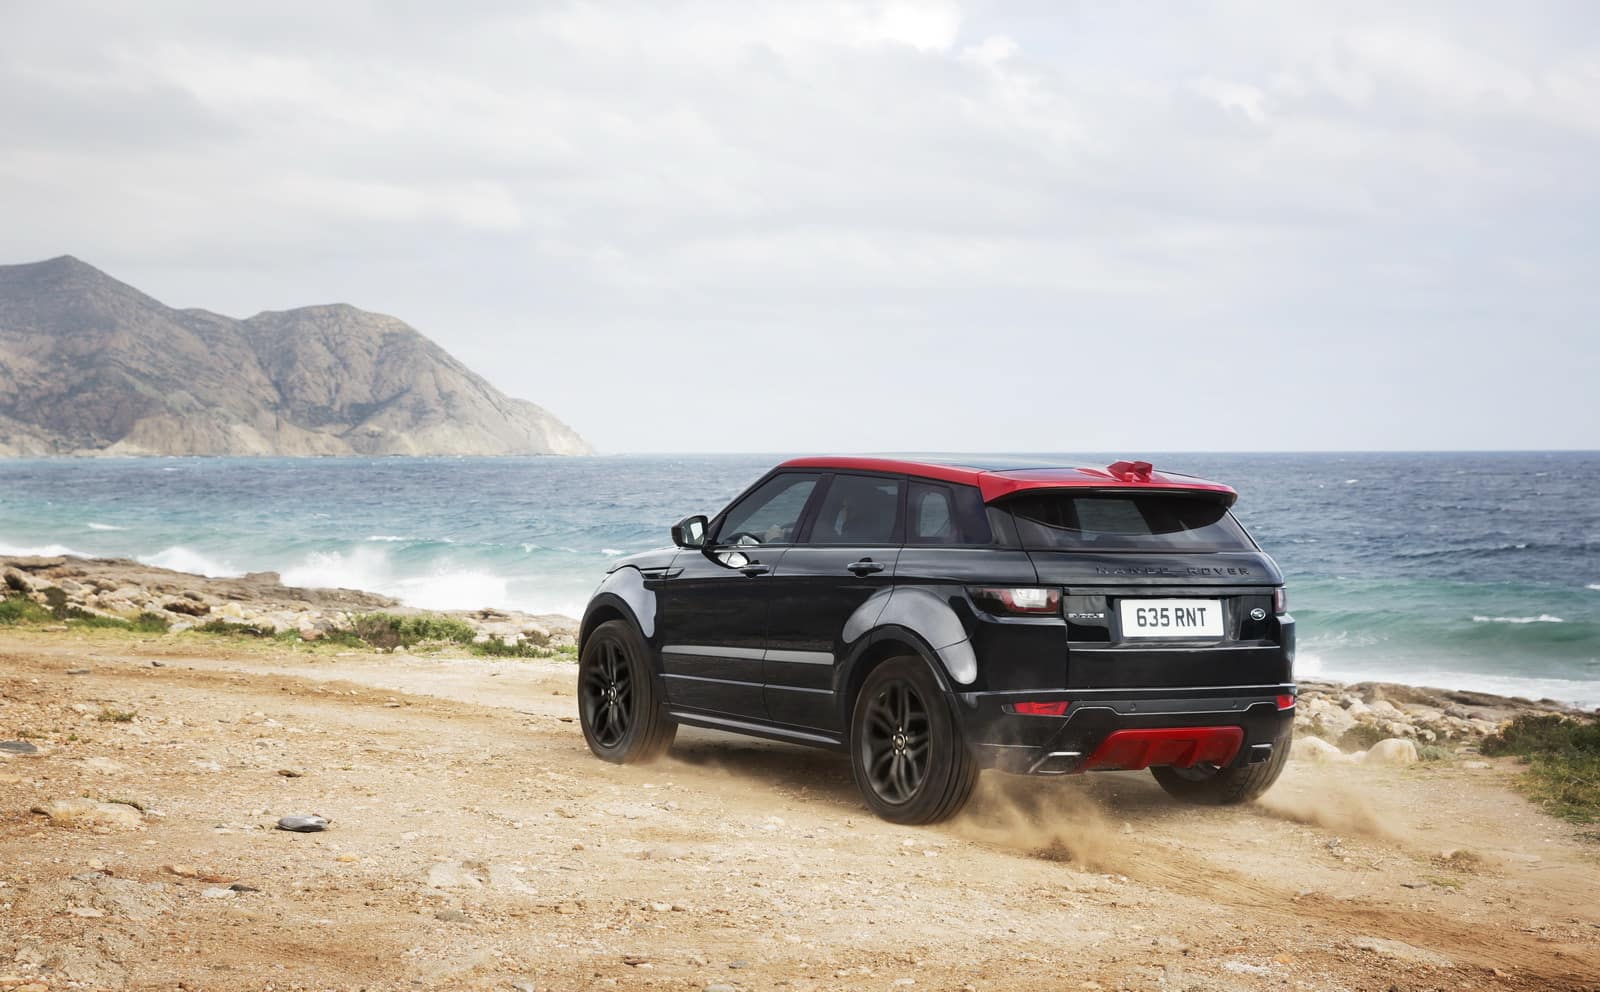 2017-Range-Rover-Evoque-Ember-Limited-Edition-2